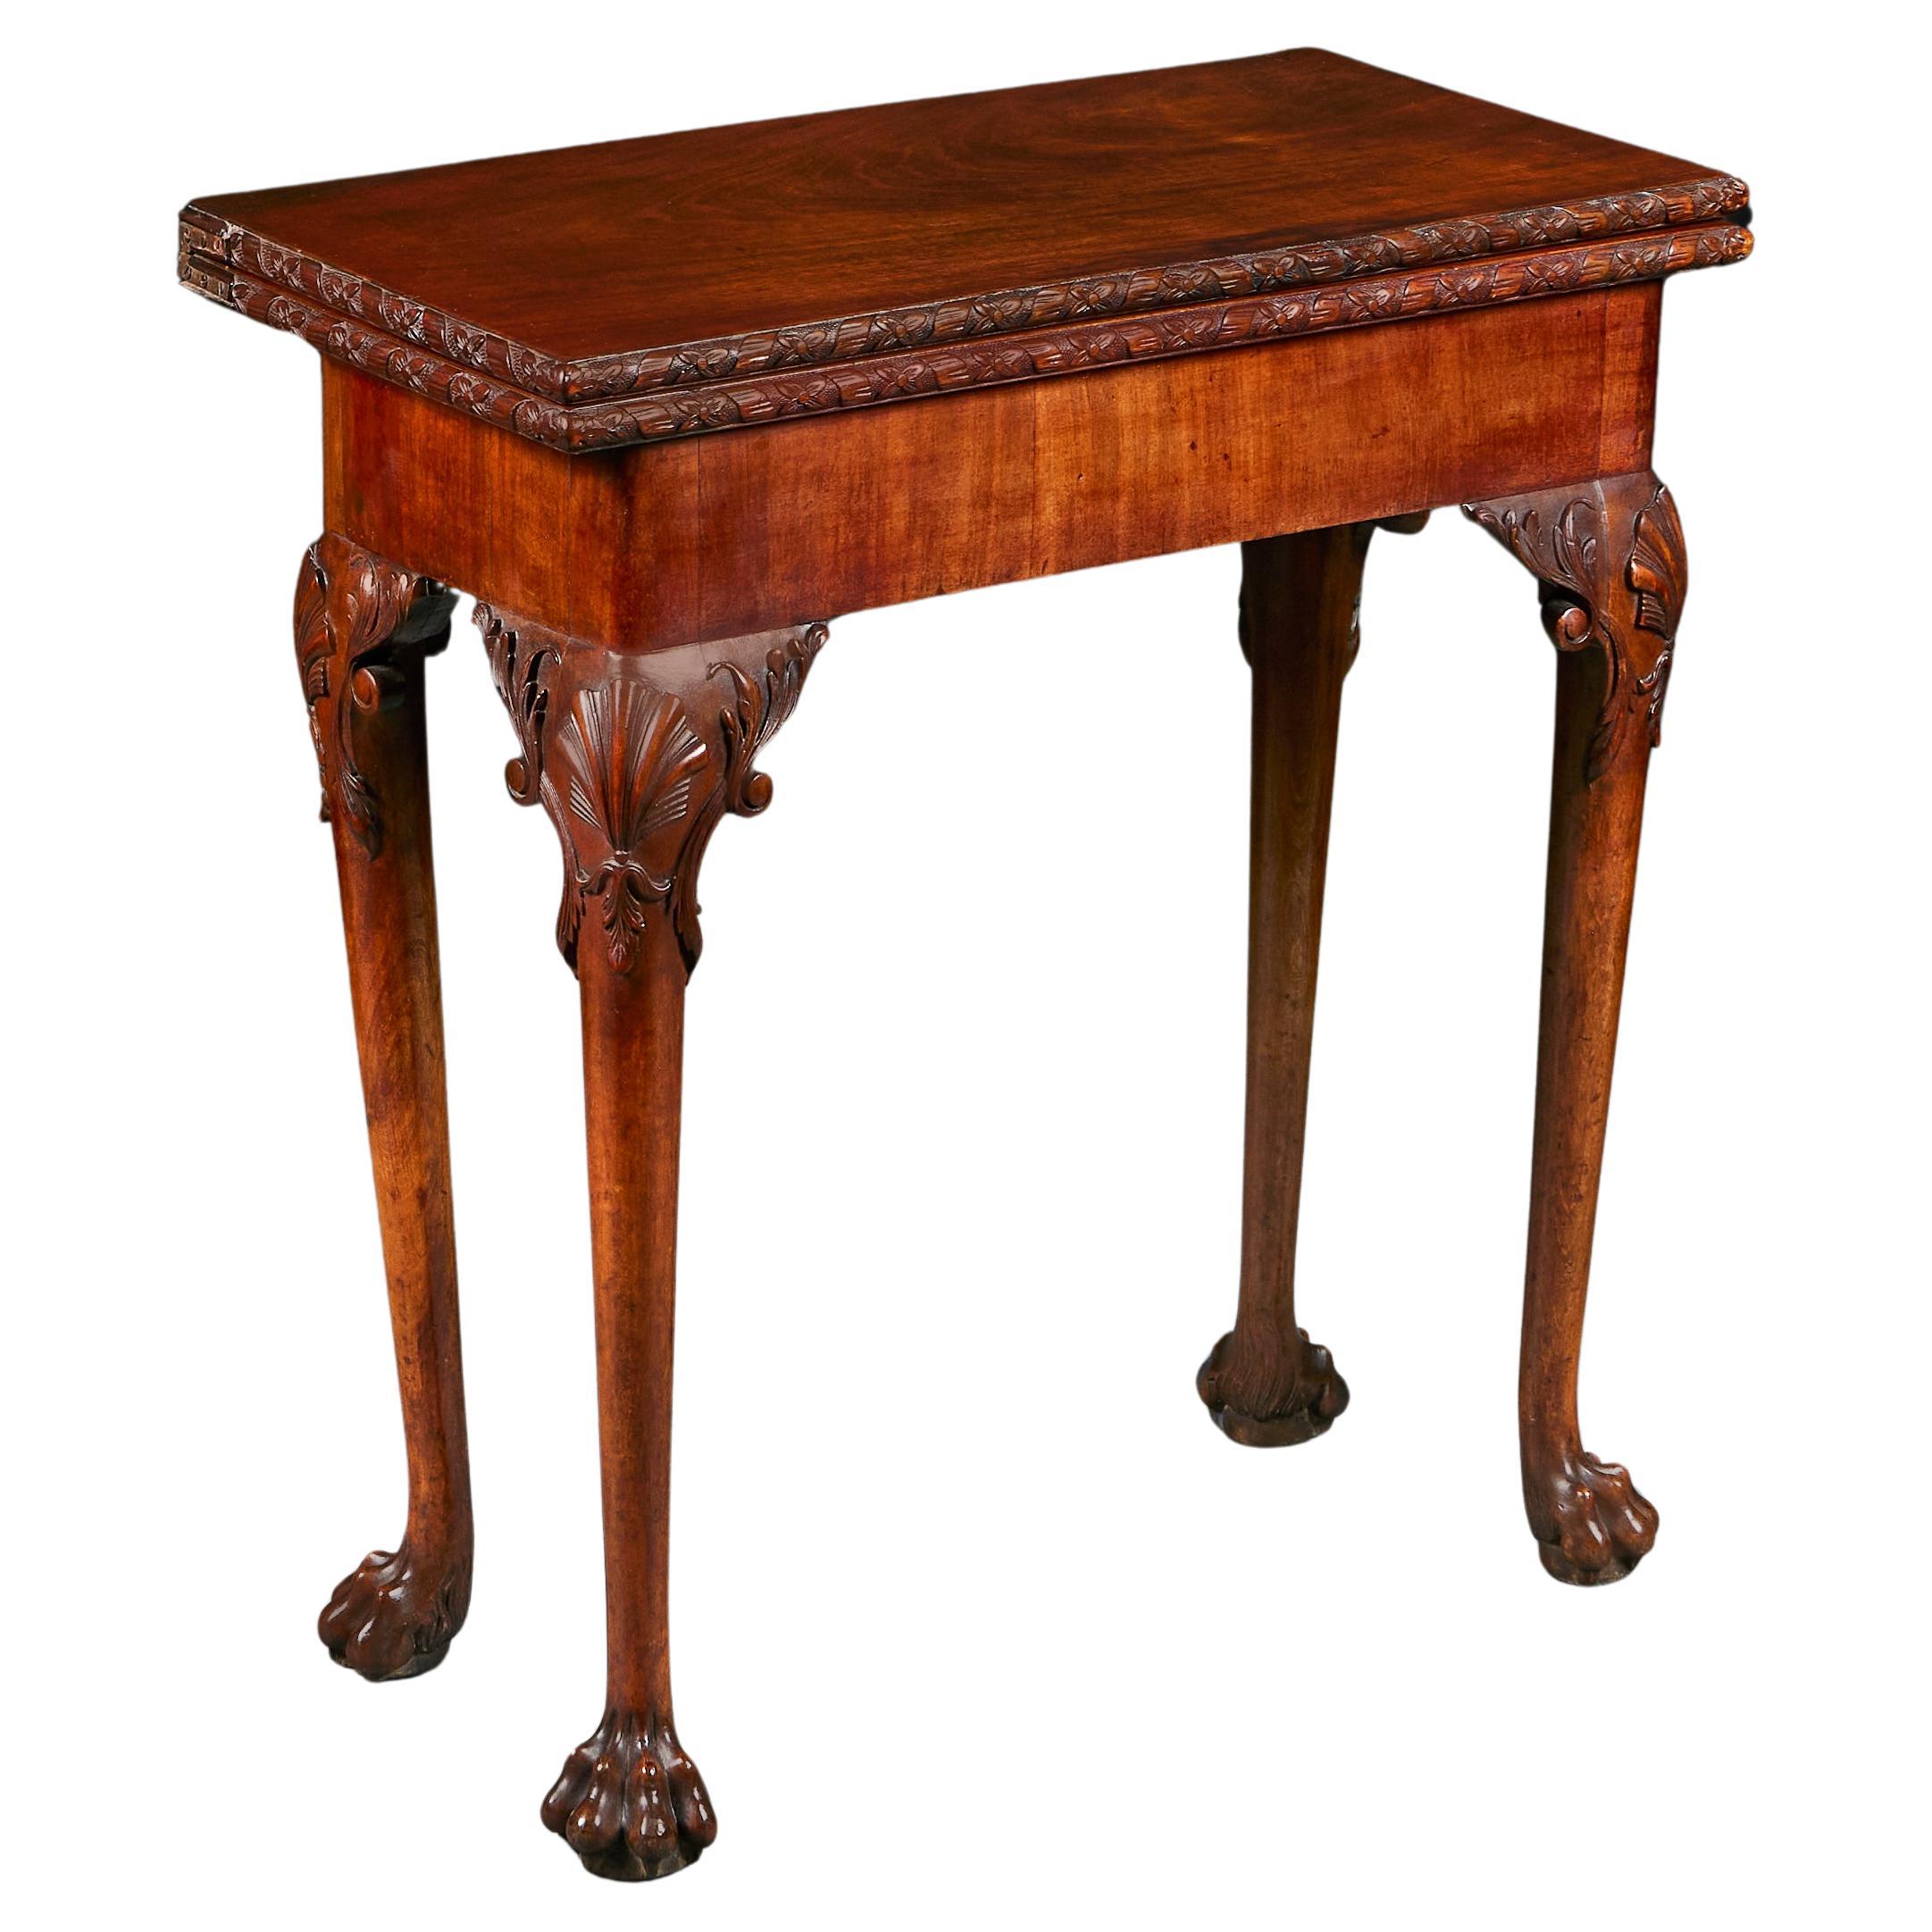 A George II Tea Table with Concertina Mechinism